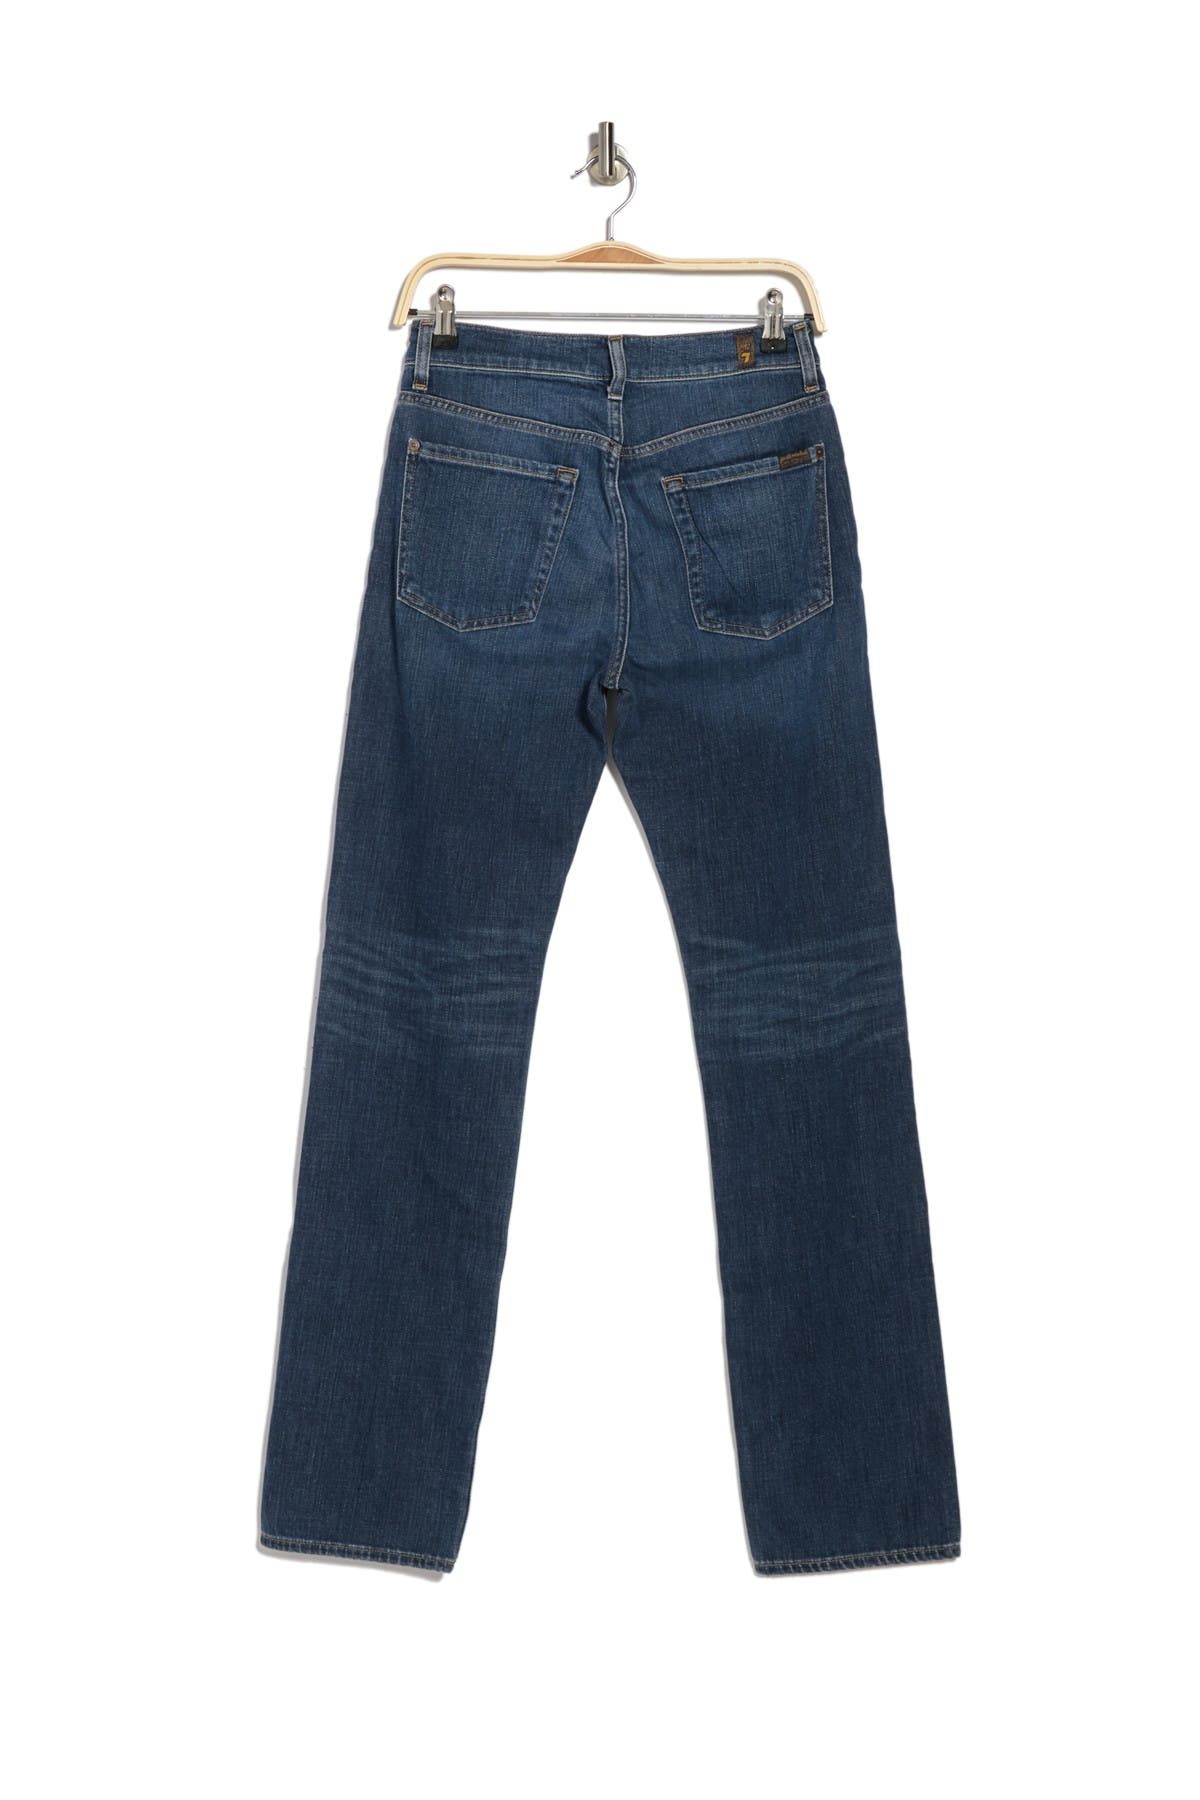 7 For All Mankind Slimmy Straight Leg Jeans In Blue